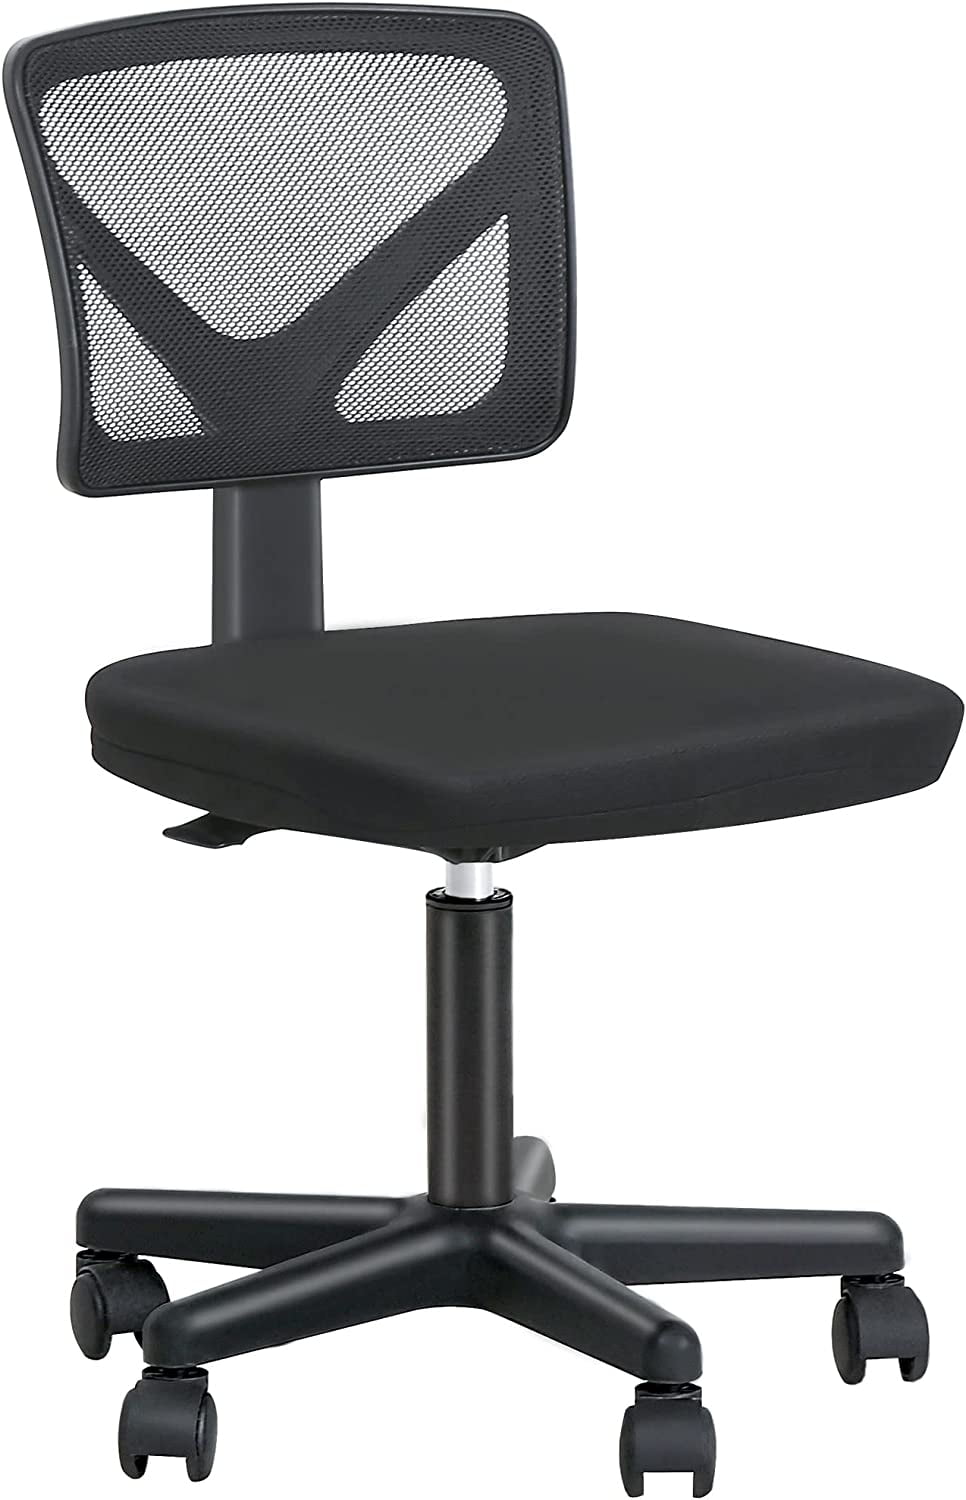 Ergonomic Office Chair to Keep You Comfortable - Lumbar Support, Fully  Adjustable & Reclining Backrest to Keep Your Posture Intact - Mesh Back,  Swivel